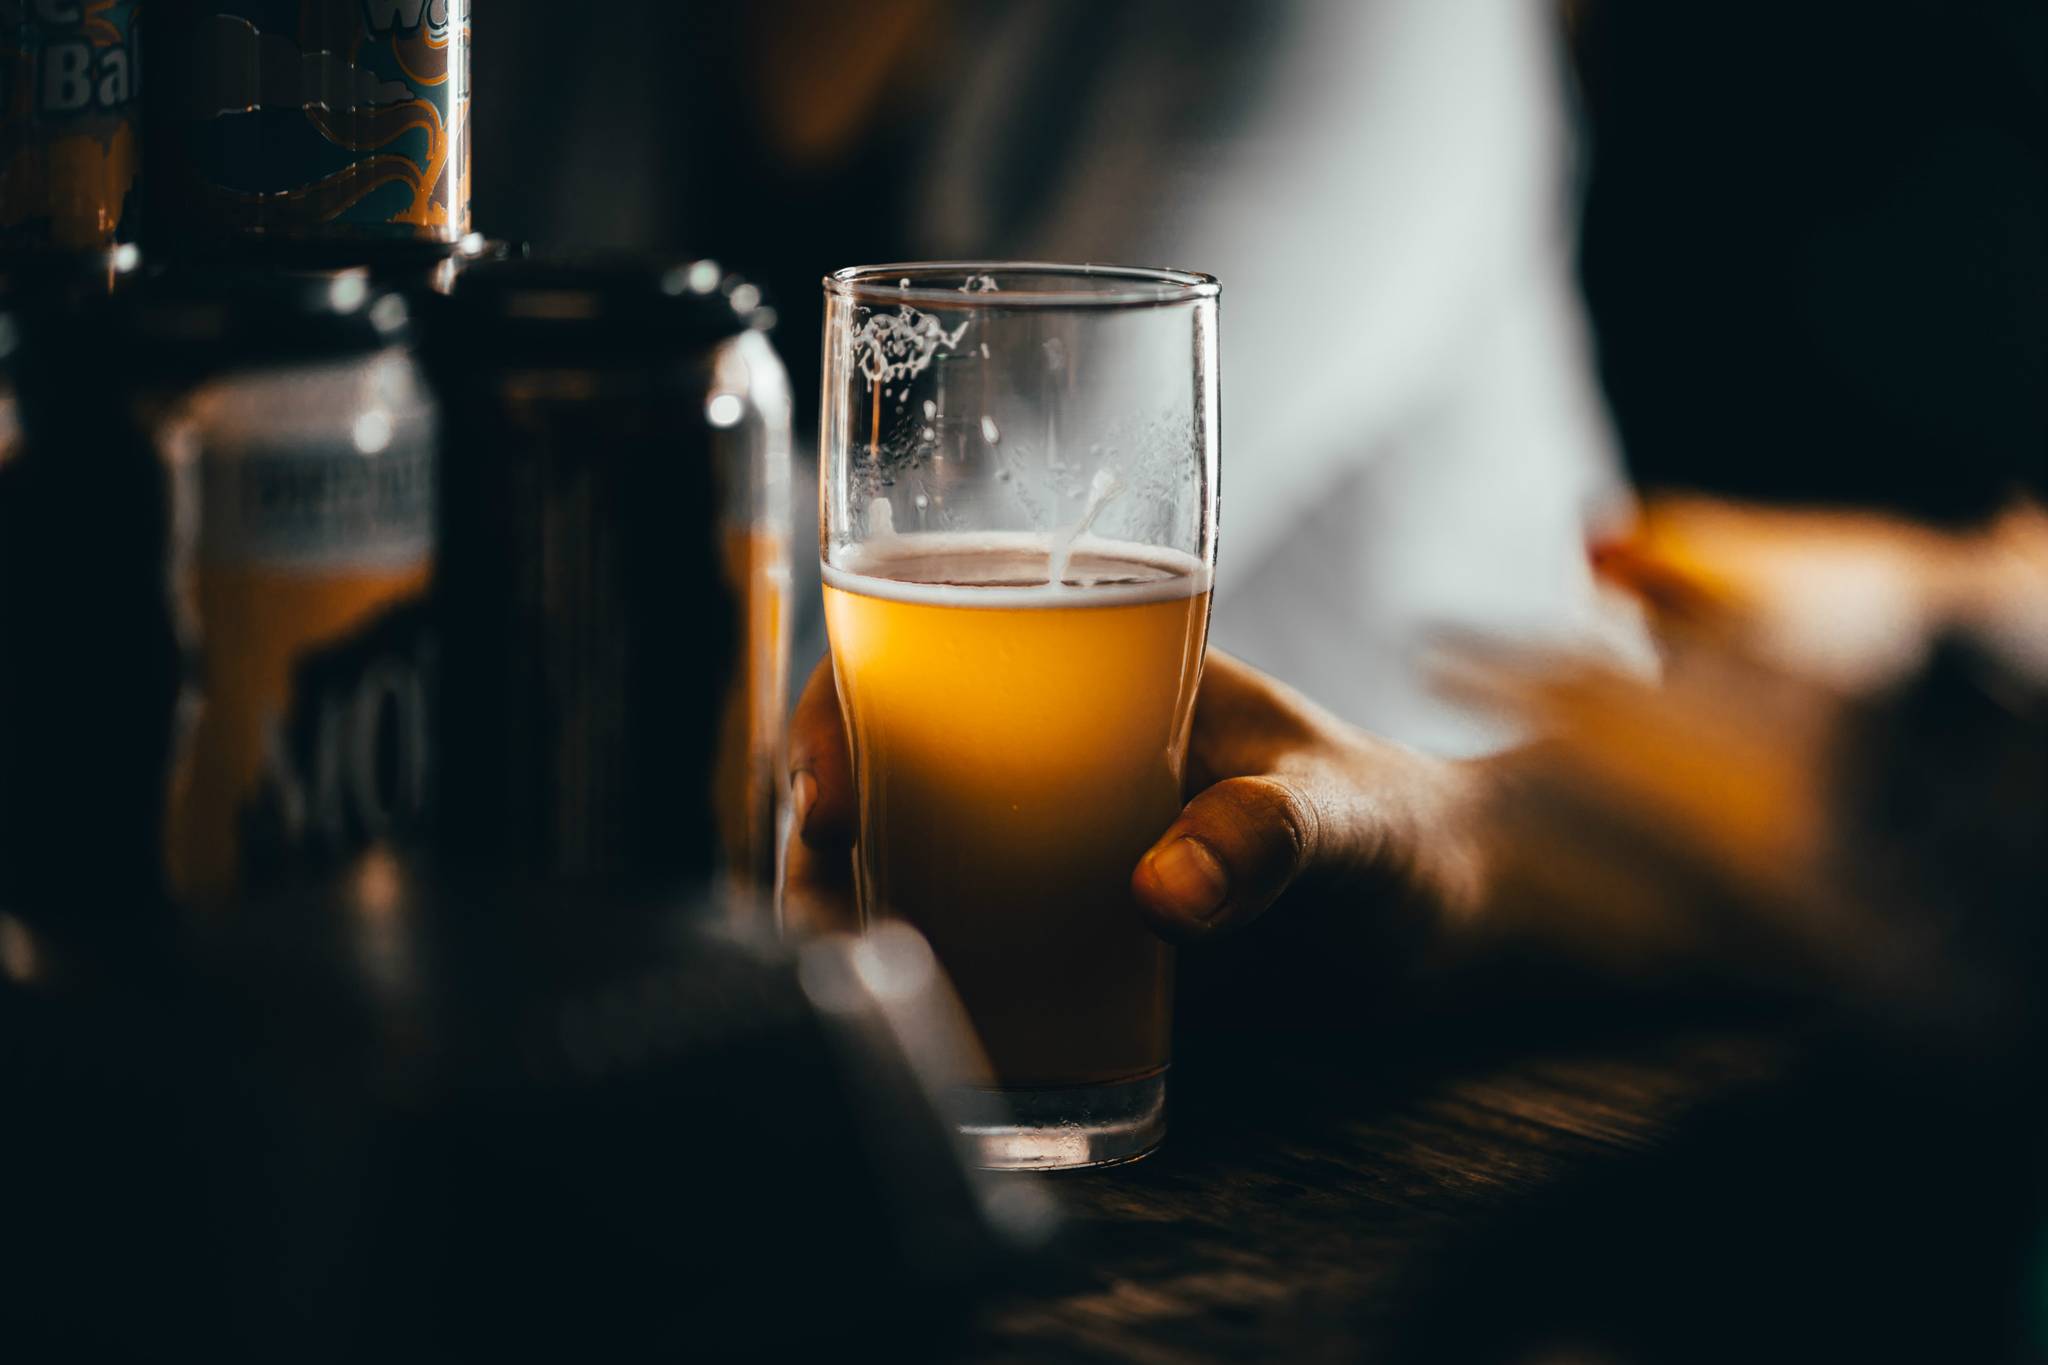 Natural Light incentivizes tax filing with free beer